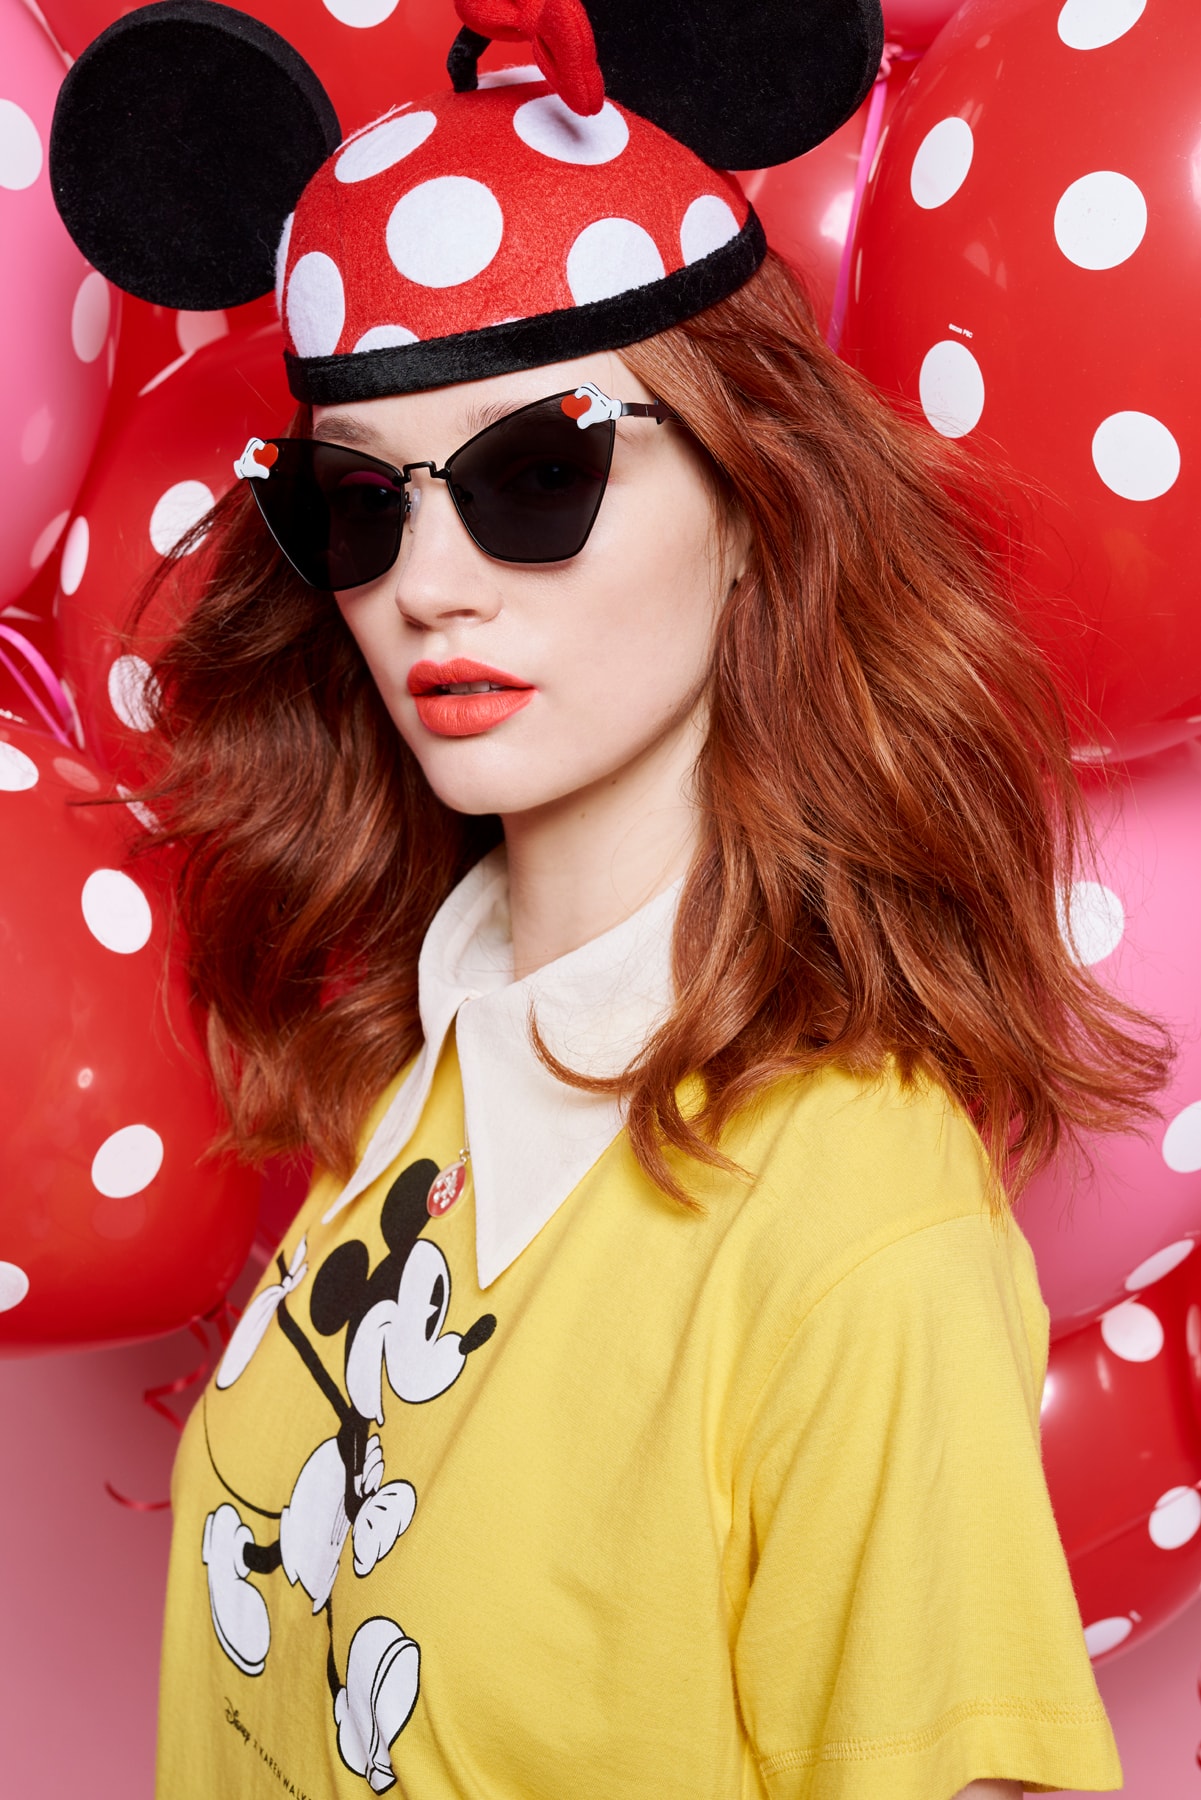 Disney x Karen Walker Mickey Mouse Collaboration Anniversary Minnie Mouse Capsule Collection Eyewear Apparel Cartoon Character